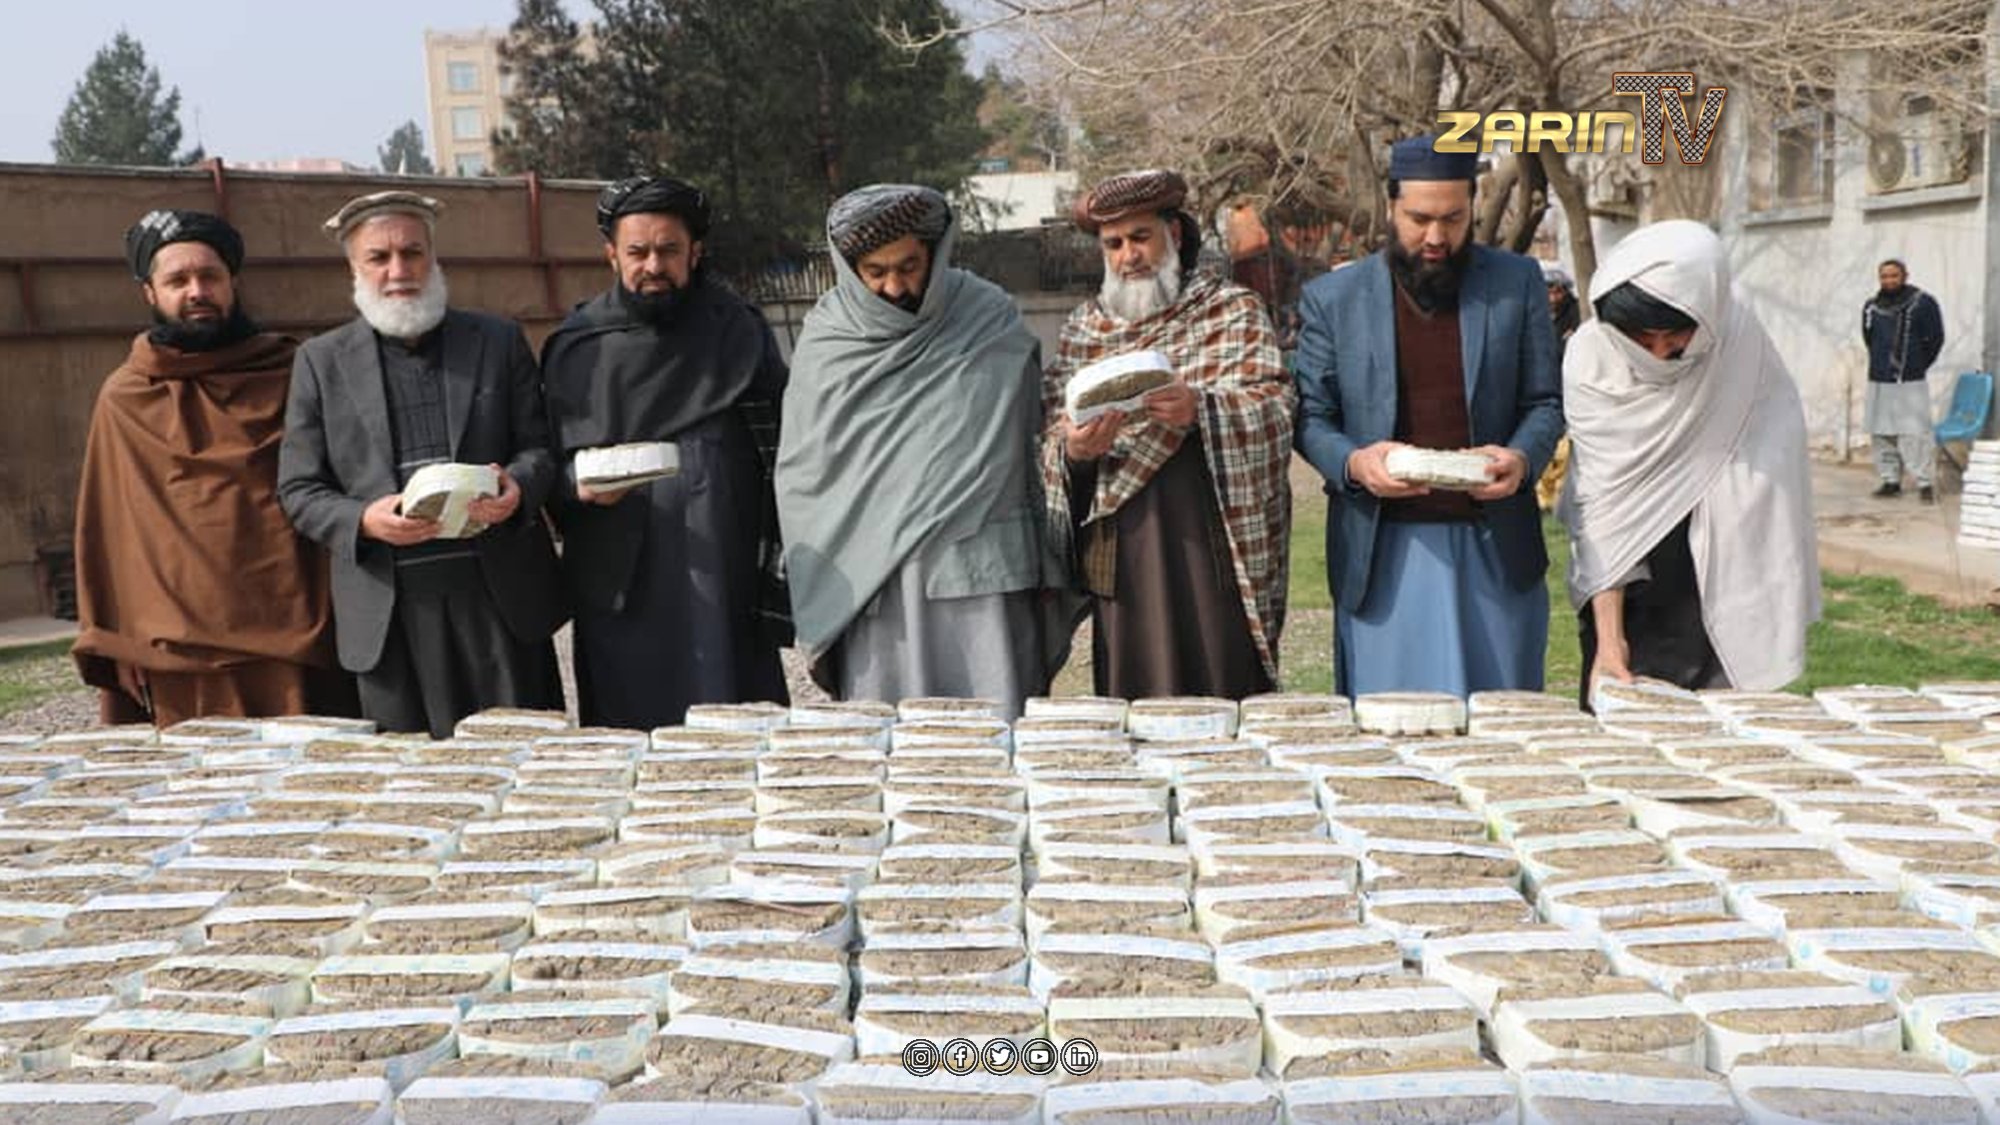 The fire of about 500 million Afghanis of Mandars bank notes by the central bank